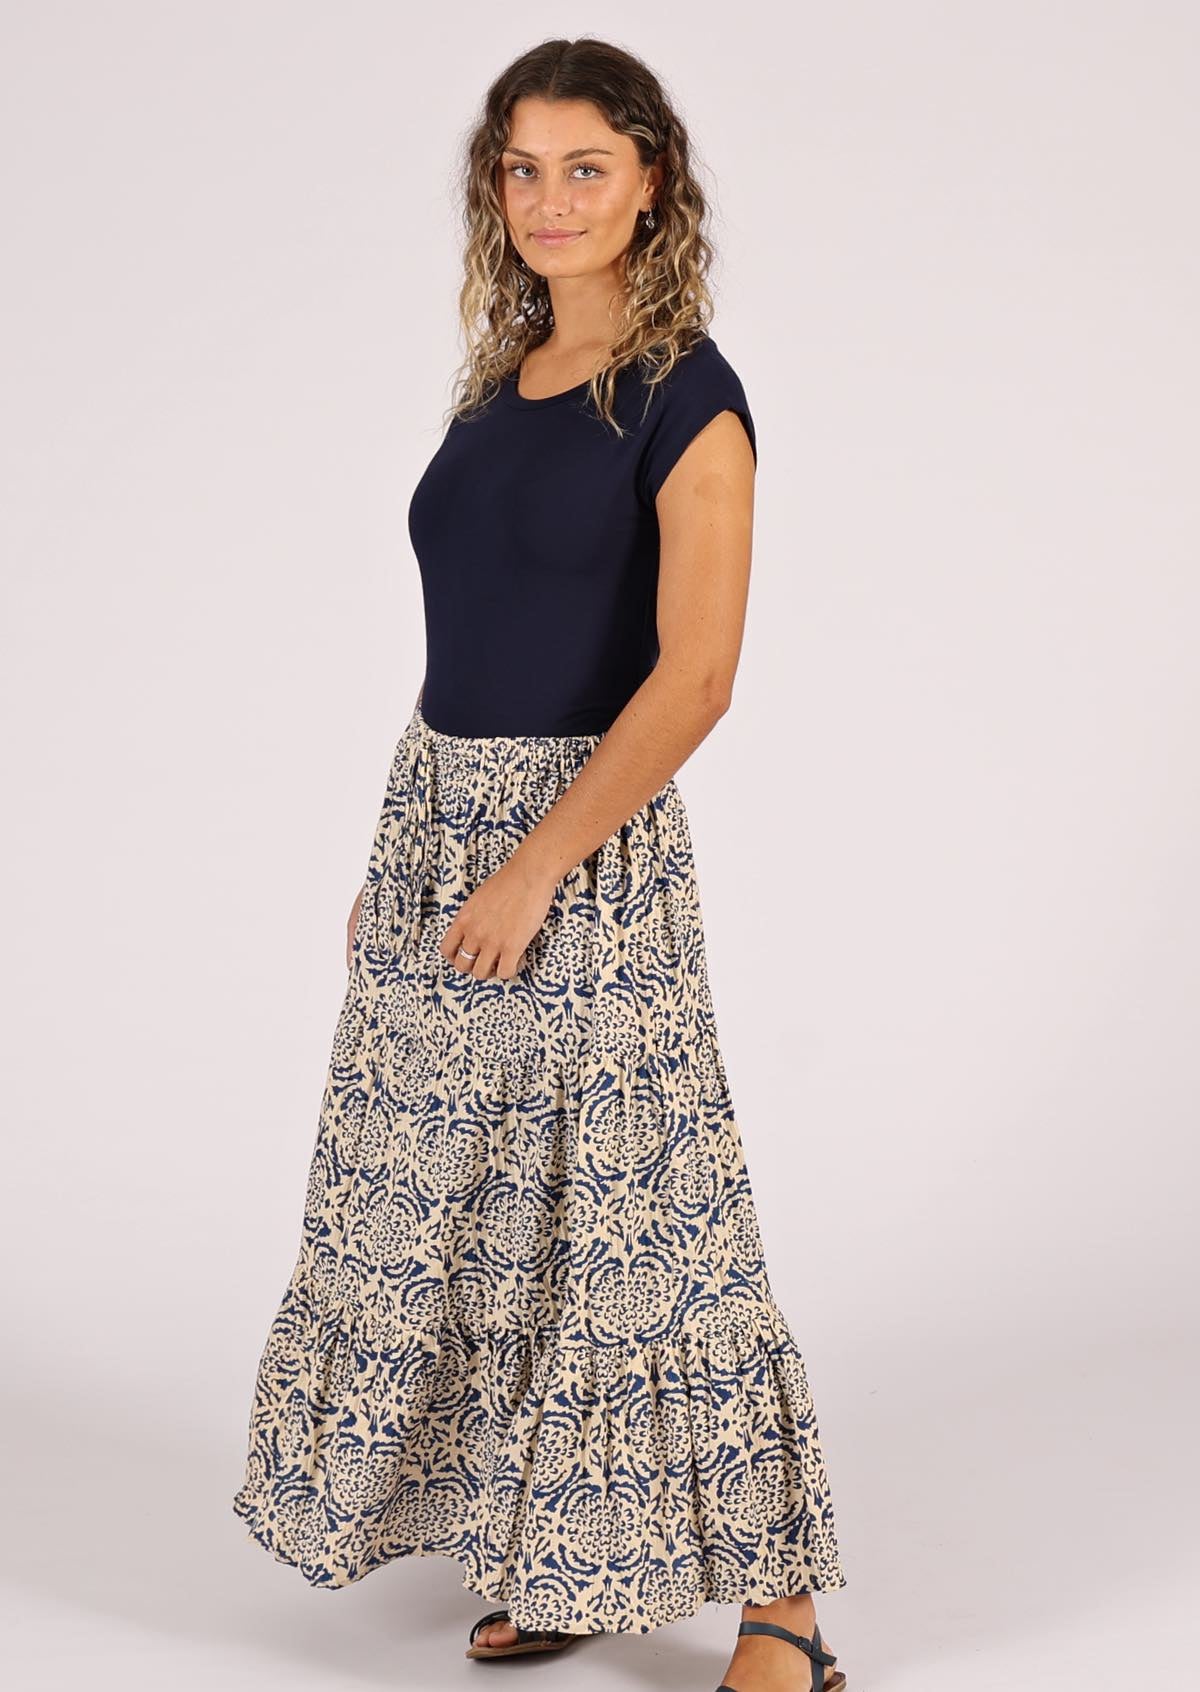 Tiers of voluminous cotton fabric in this maxi skirt